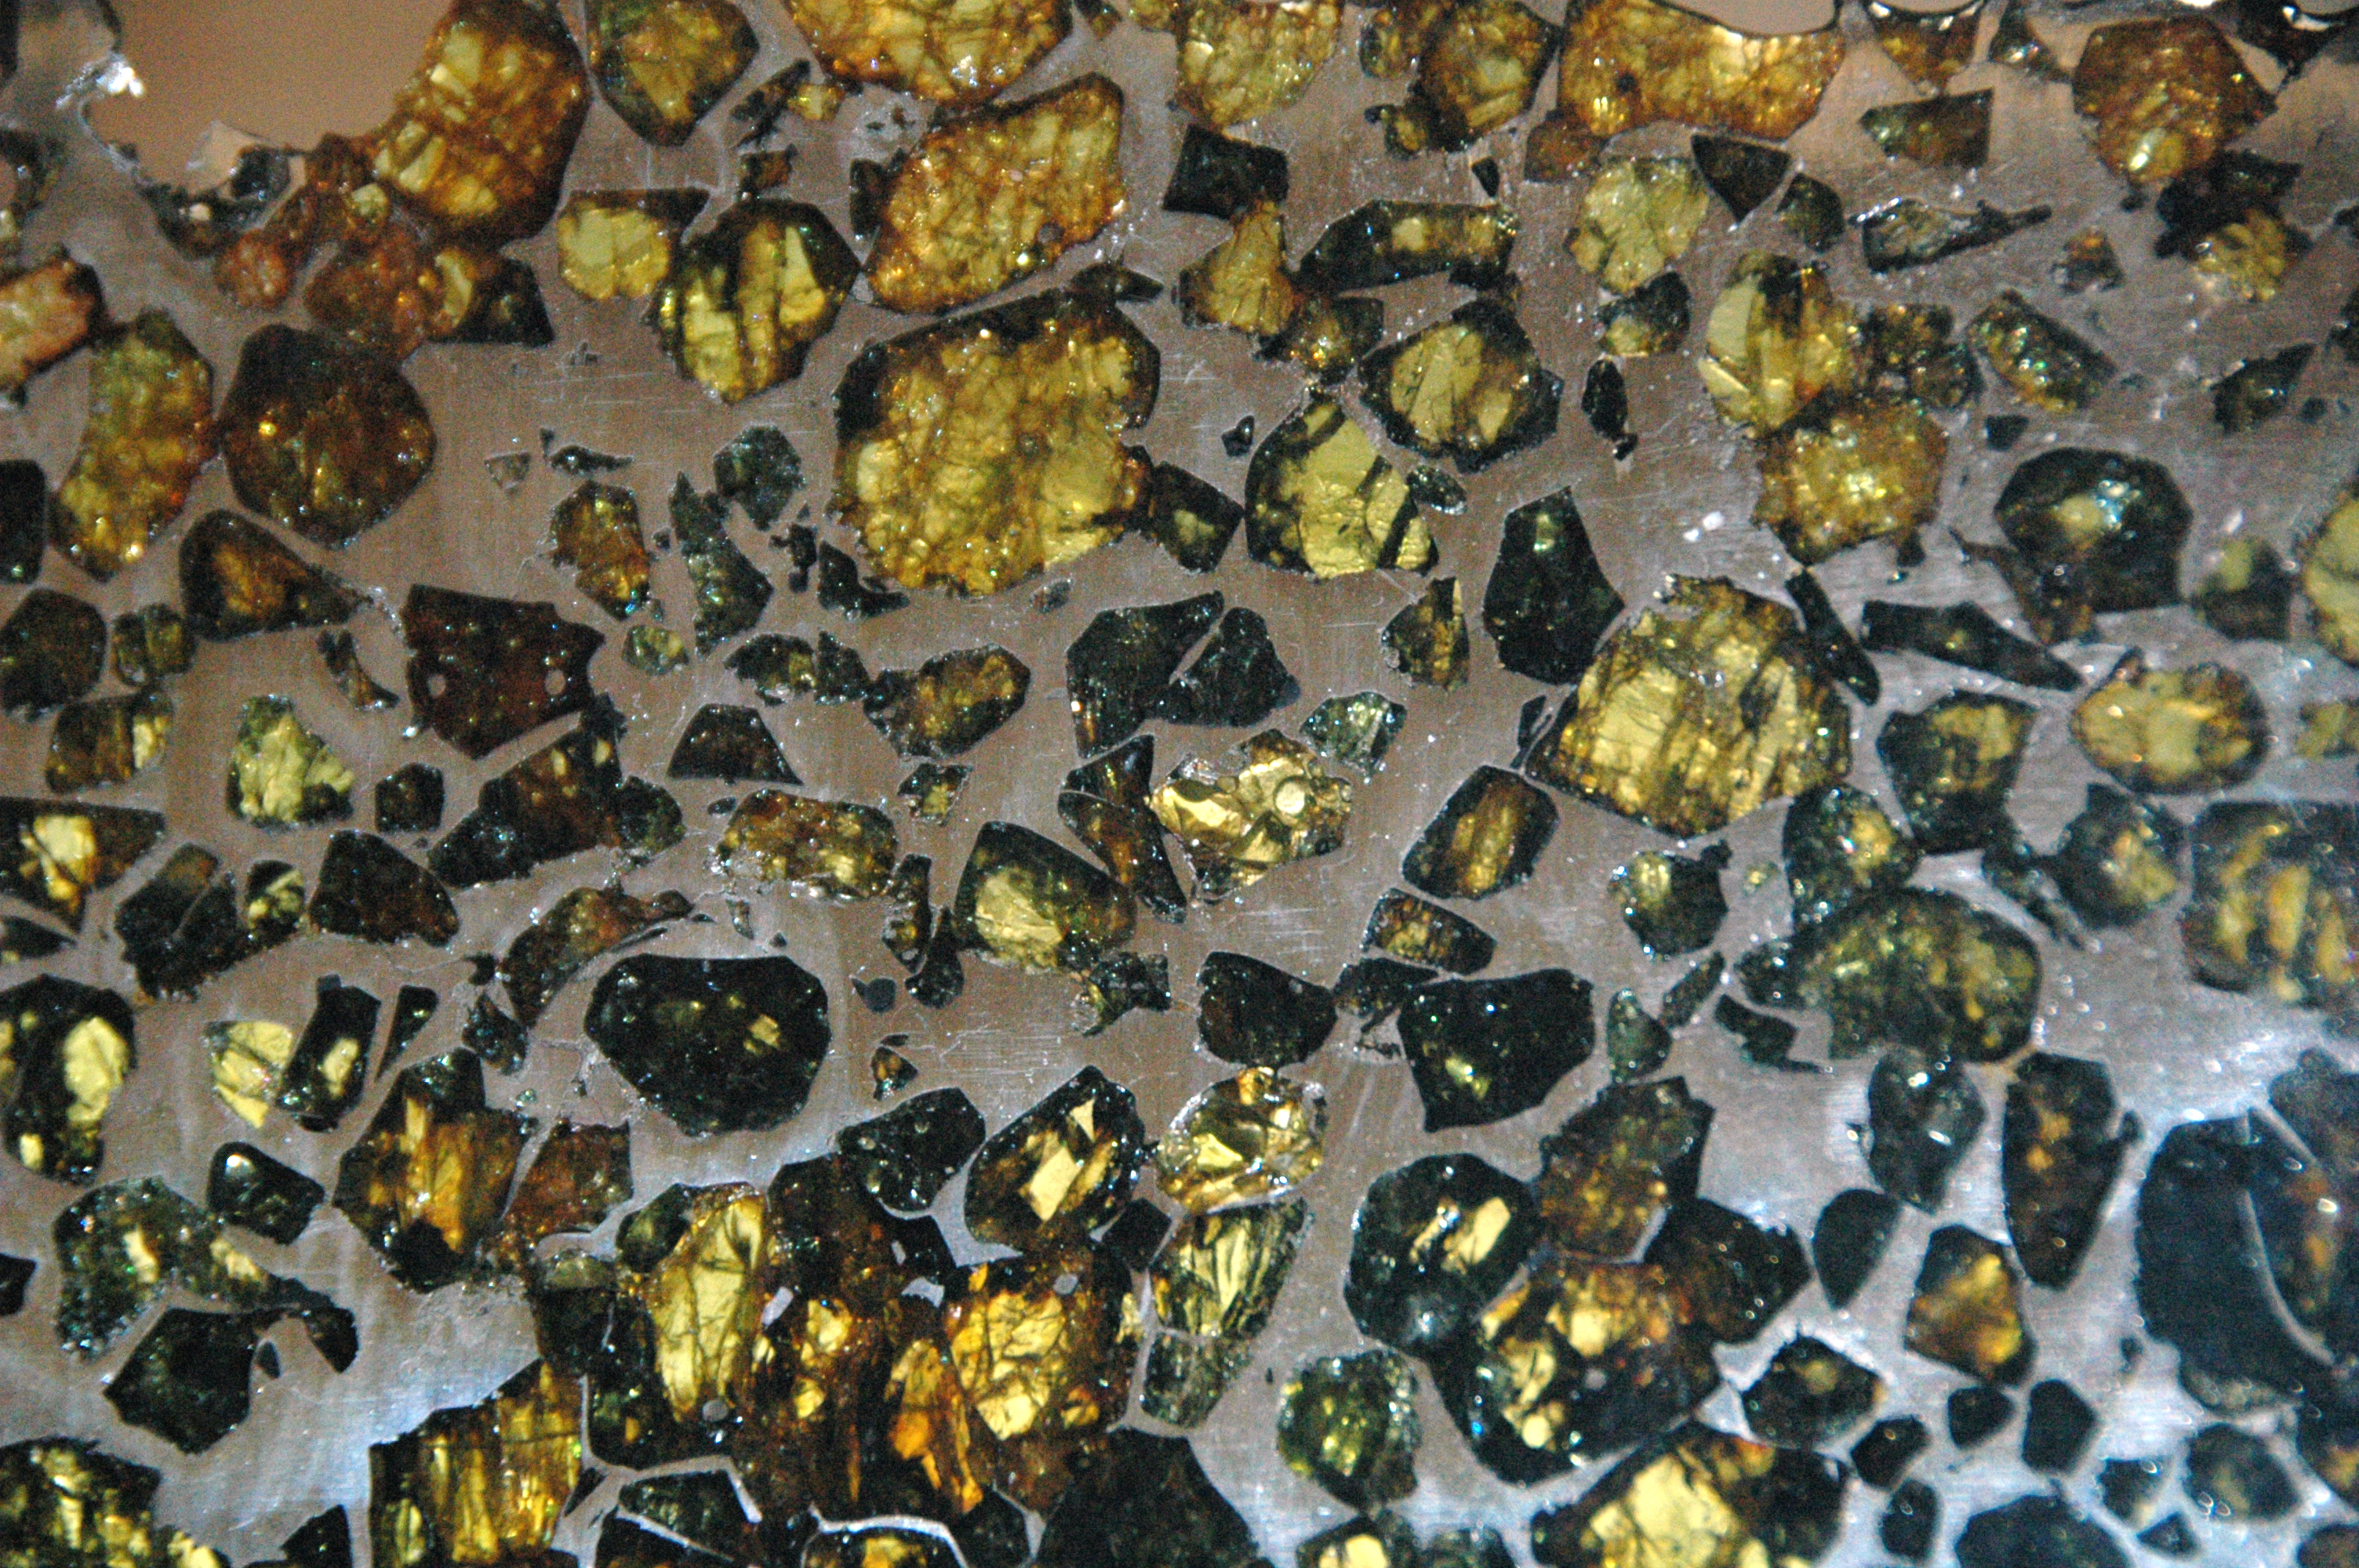 Cut and polished slice of a pallasite stony-iron meteorite. The green crystals are olivine surrounded by an iron-nickel metal matrix.